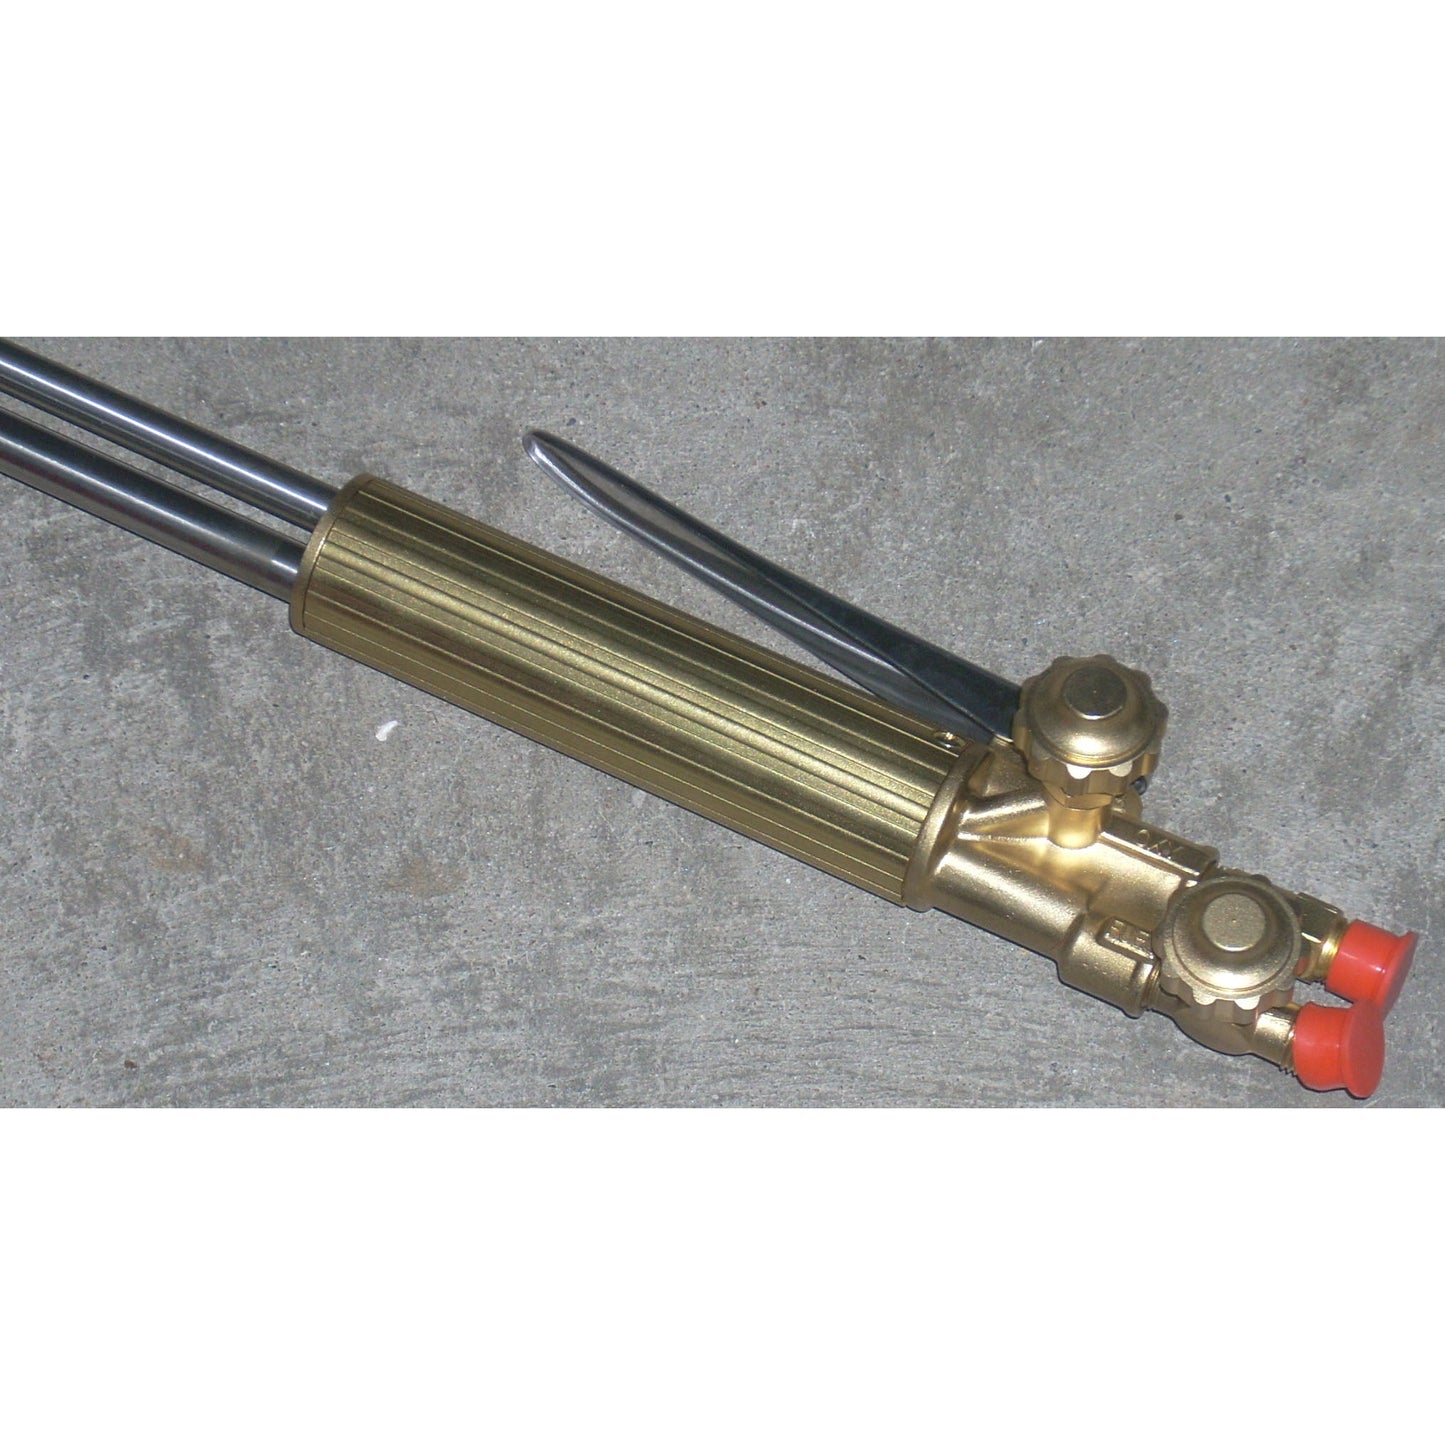 Victor style 48" Acetylene Cutting Torch 90 Degree